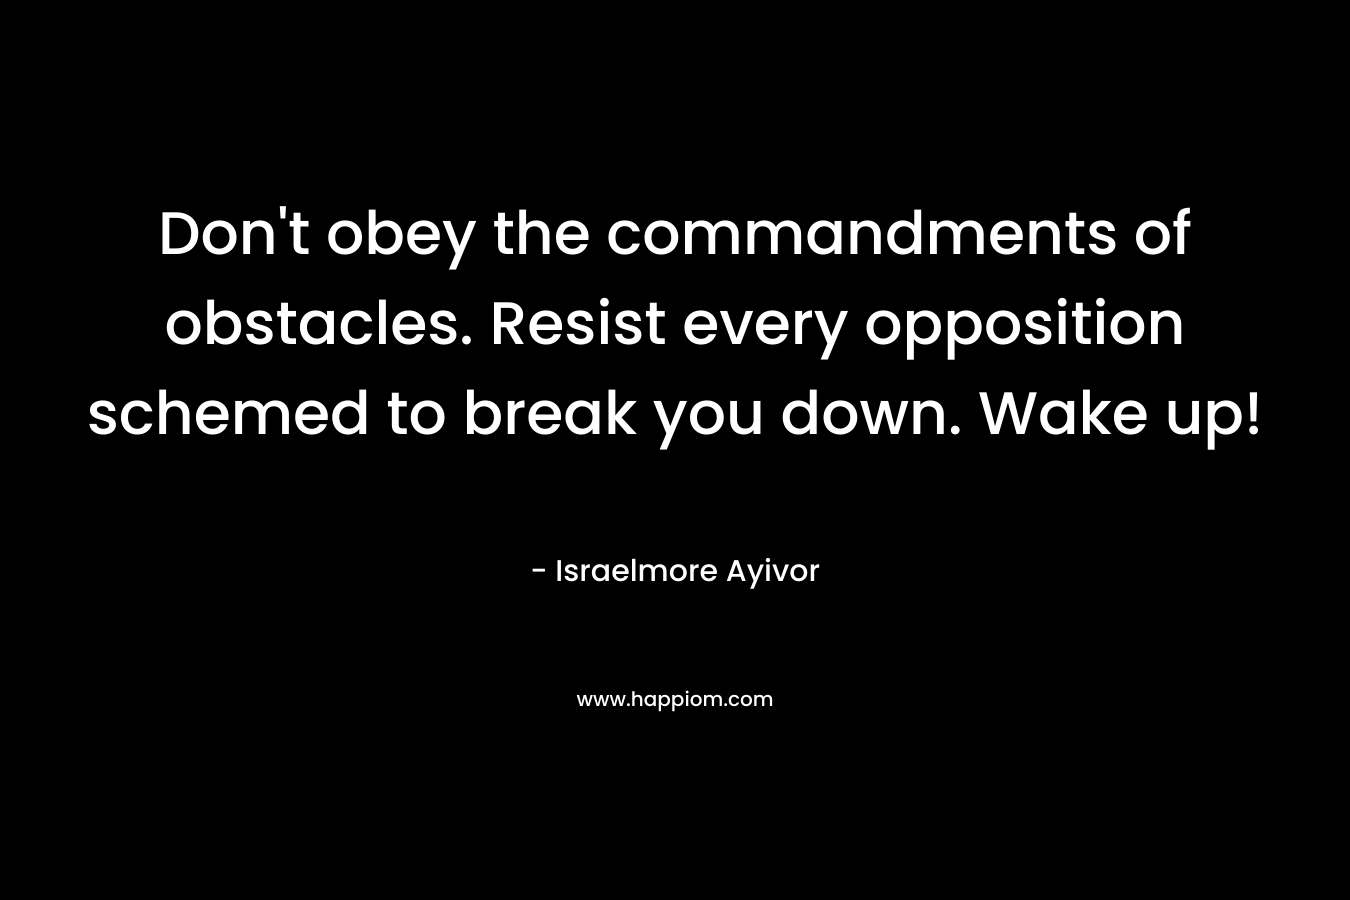 Don’t obey the commandments of obstacles. Resist every opposition schemed to break you down. Wake up! – Israelmore Ayivor